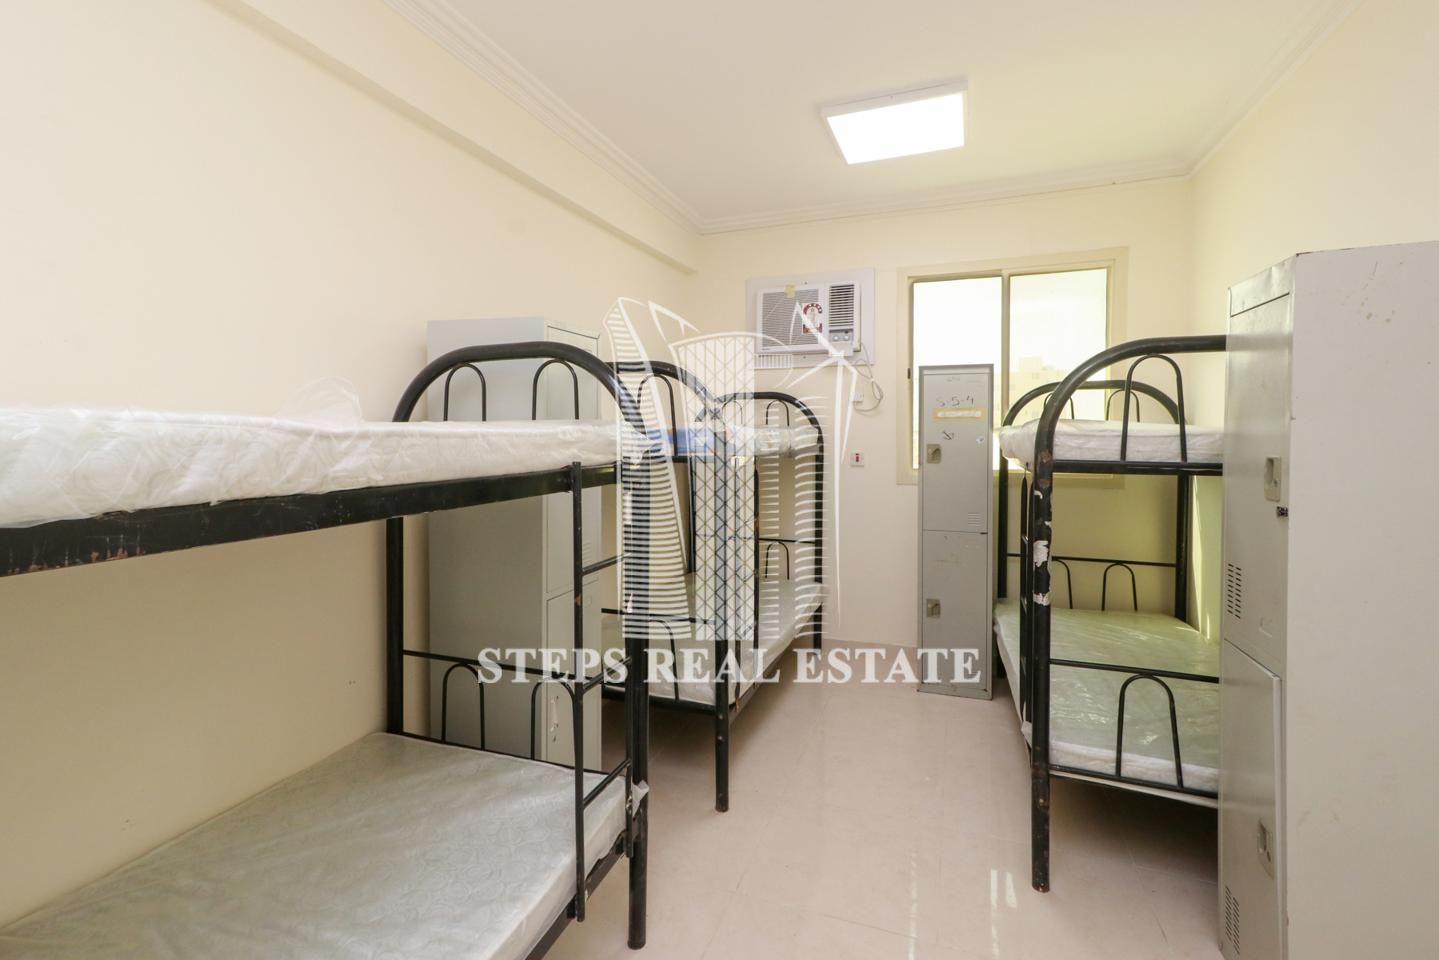 30 Labor Camp Rooms | Bills Included